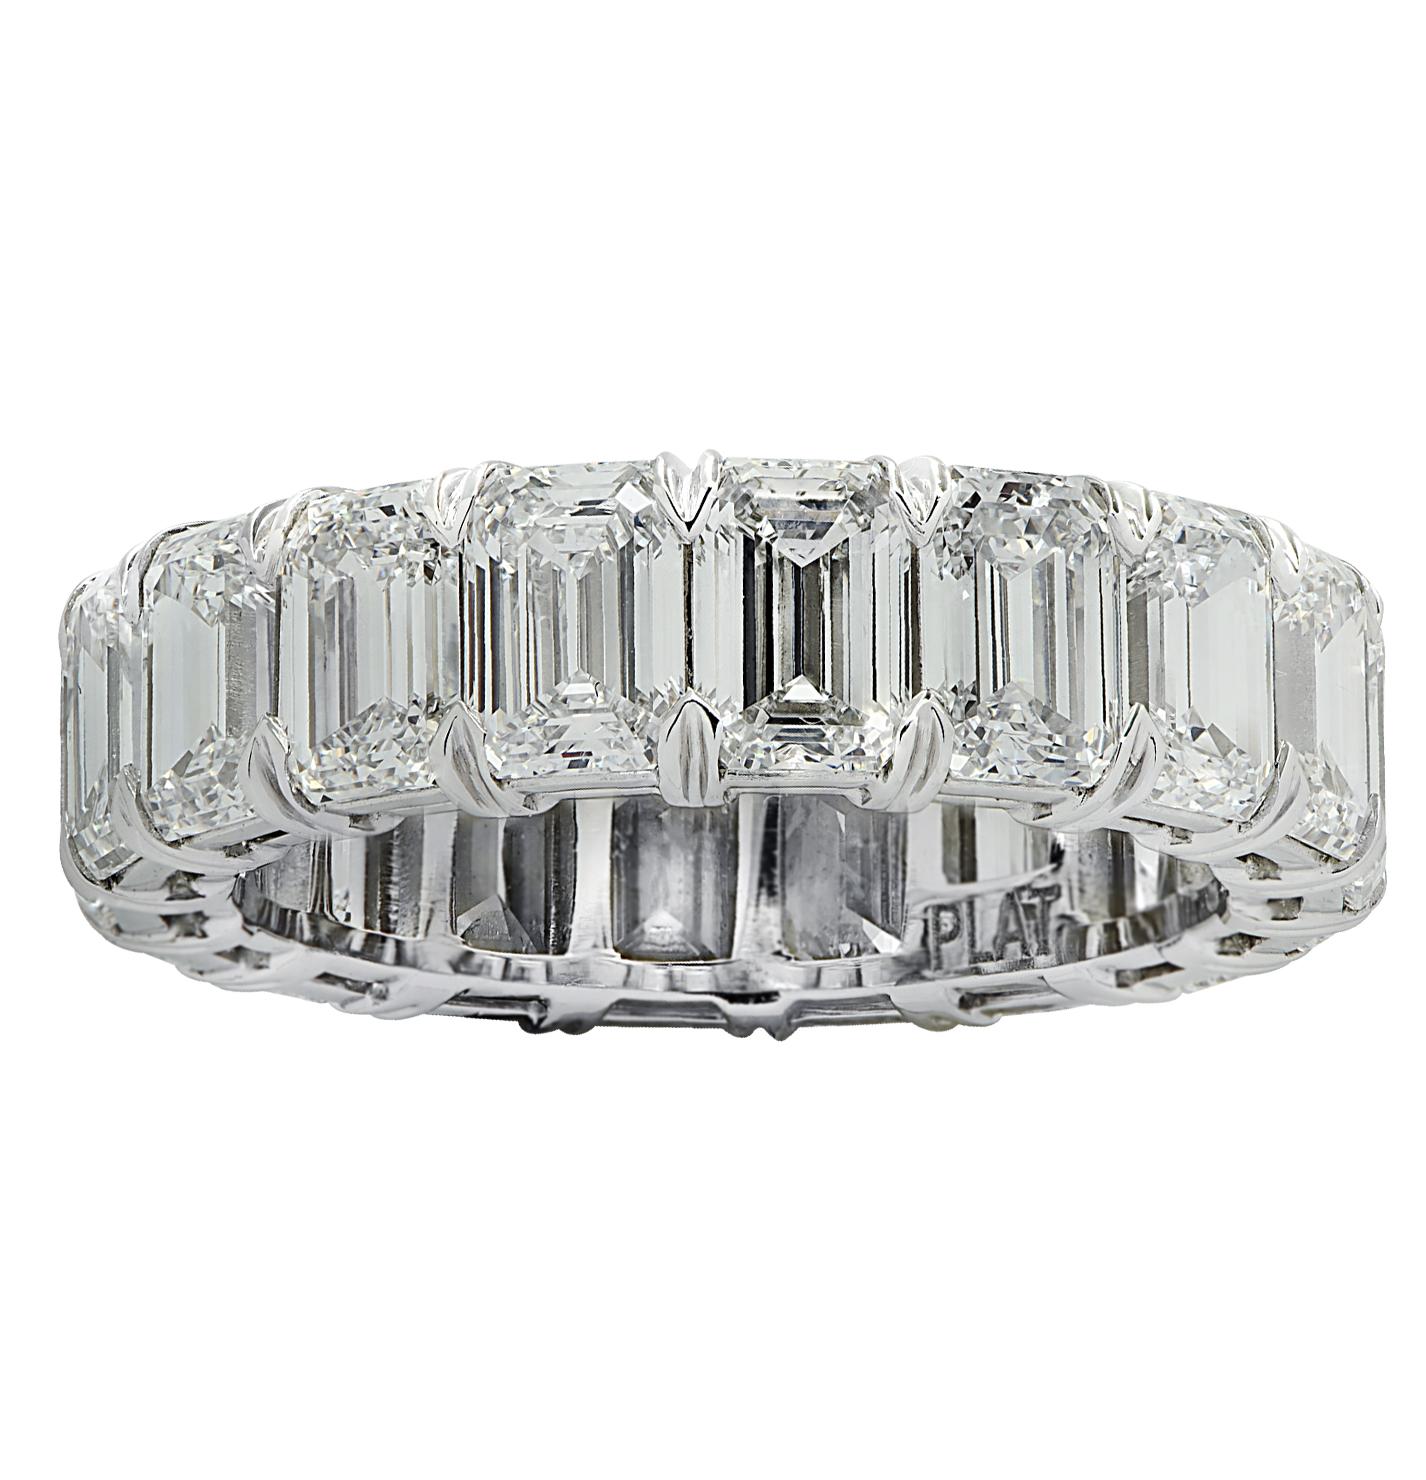 Vivid Diamonds eternity band crafted in platinum, showcasing 18  spectacular GIA Certified emerald cut diamonds, weighing 6.48 carats total, D-F color, VVS2-VS2 clarity. Each diamond was carefully selected, perfectly matched and set in a seamless